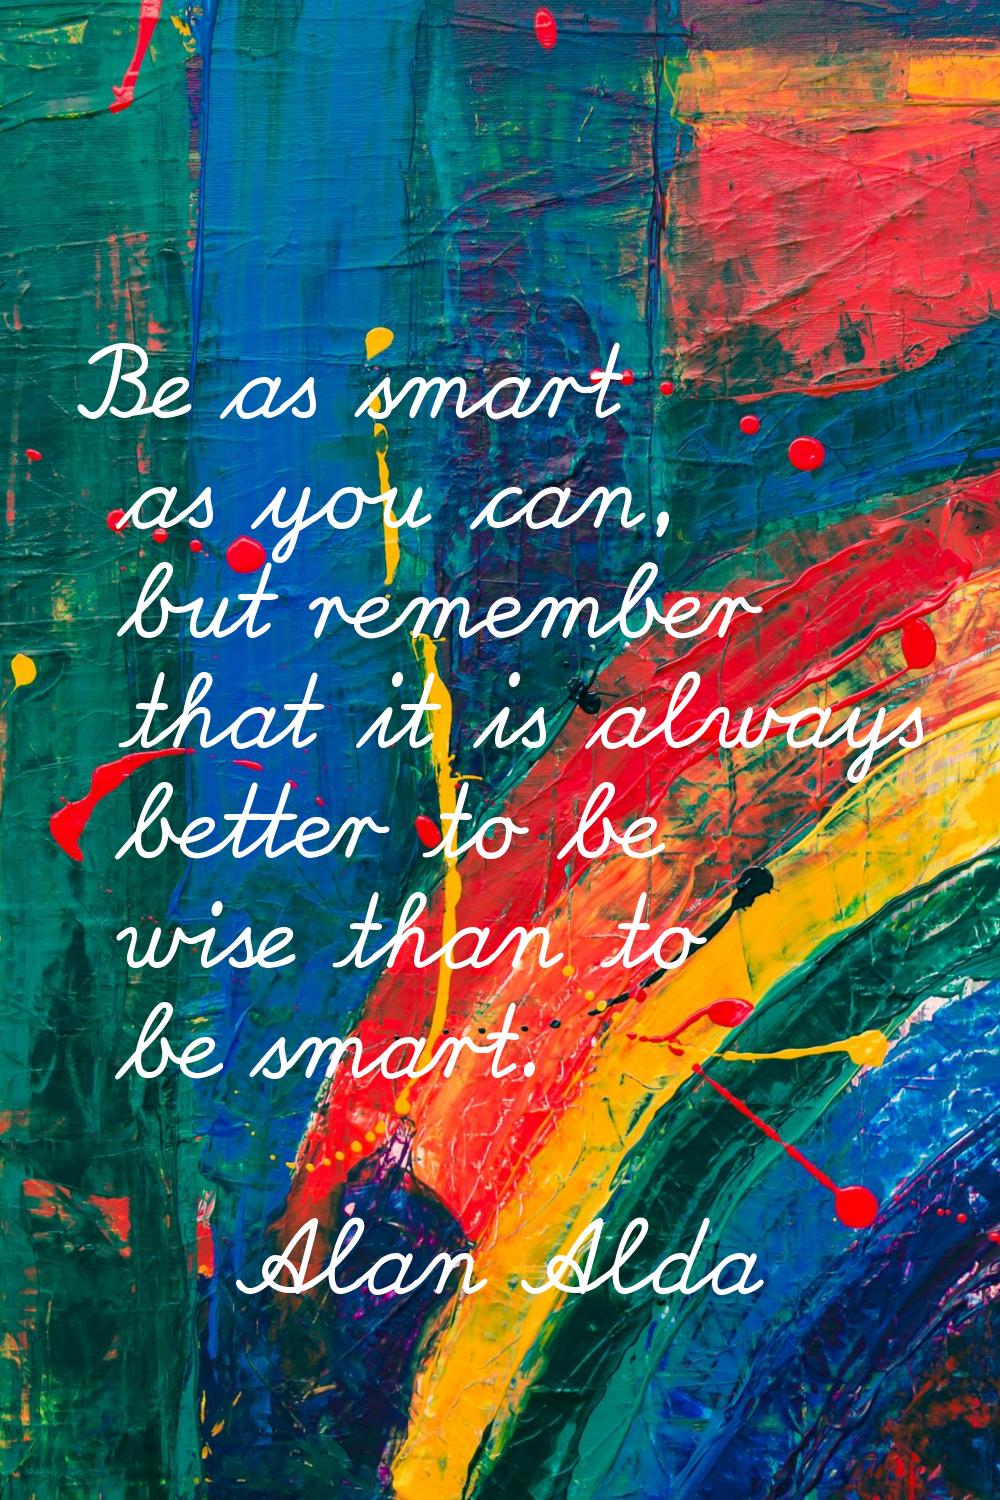 Be as smart as you can, but remember that it is always better to be wise than to be smart.